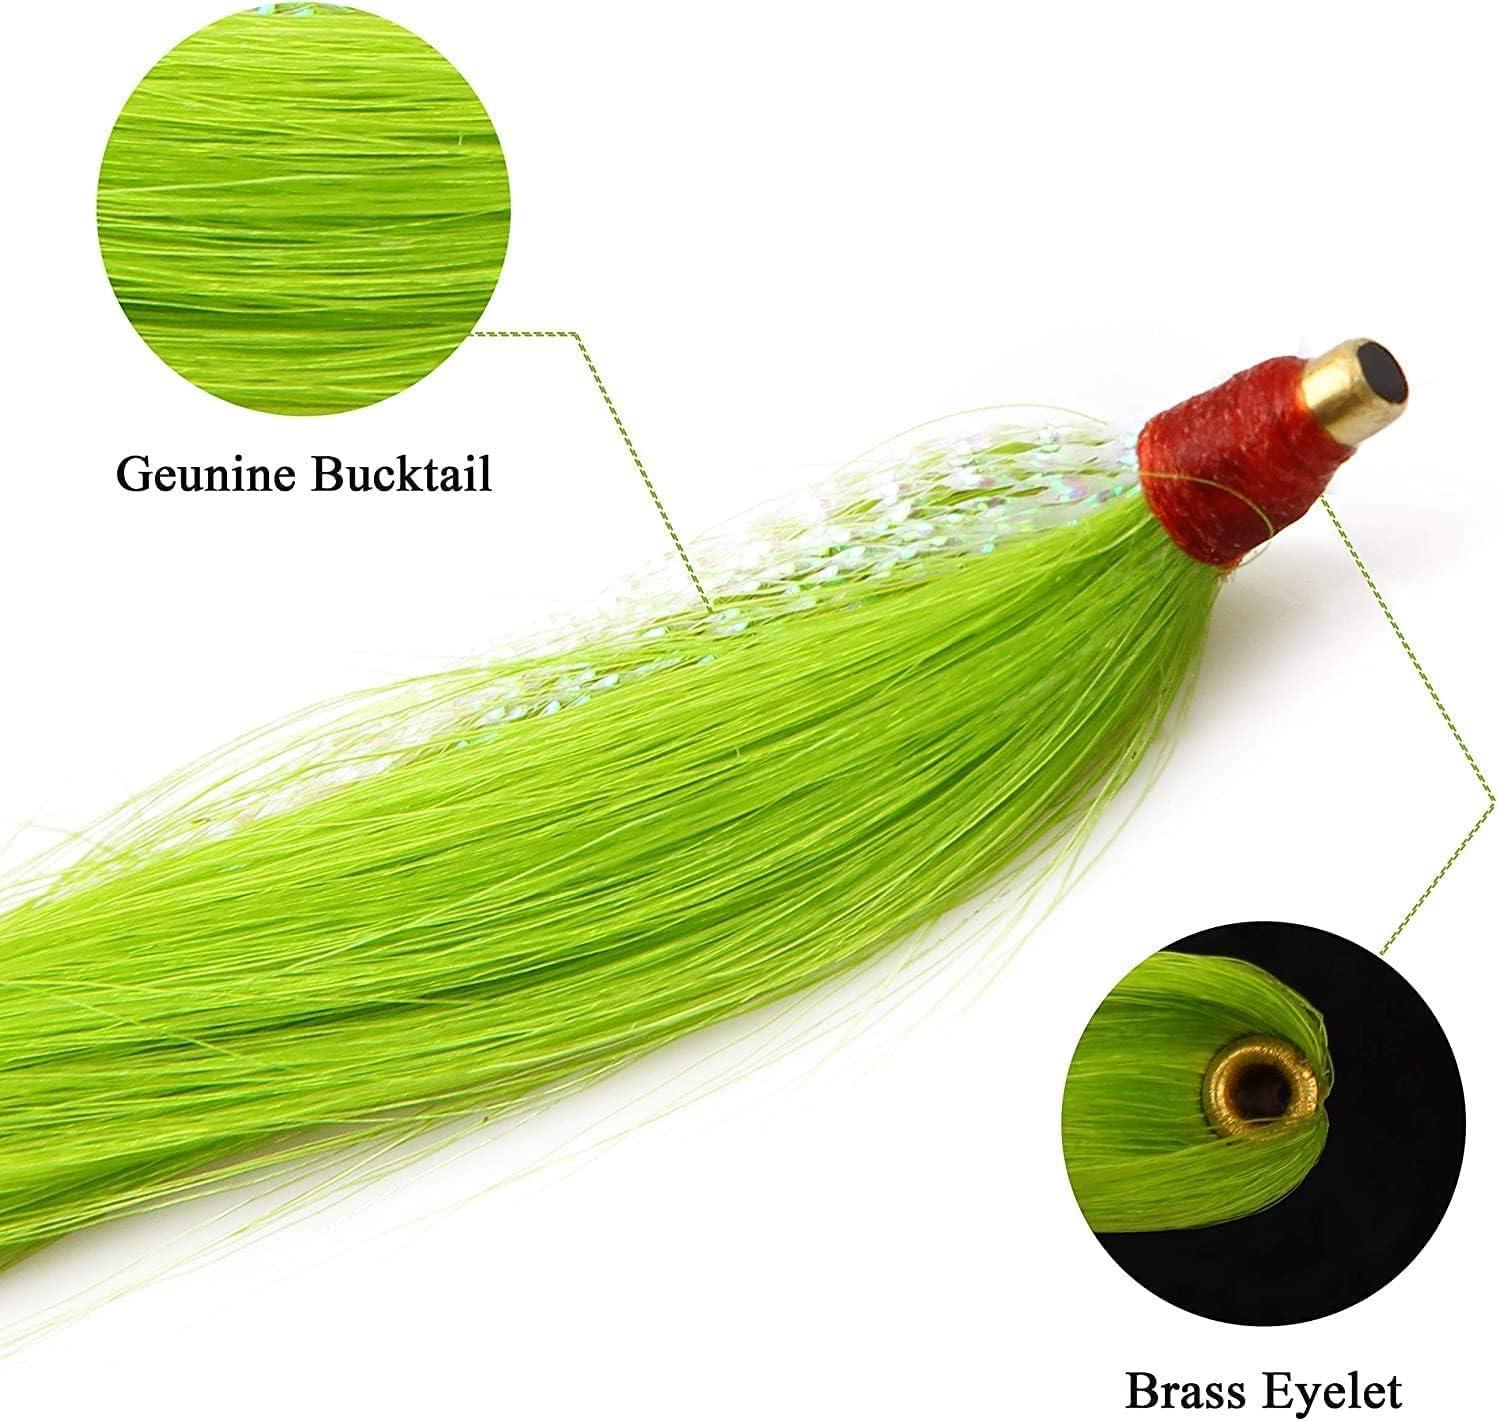 Fishing Bucktail Teasers Saltwater Fishing Lure Rig Fluke Rigs Flounder  Rigs Fishing Teasers Chartreuse Pink Beige Mix Colors-12pcs